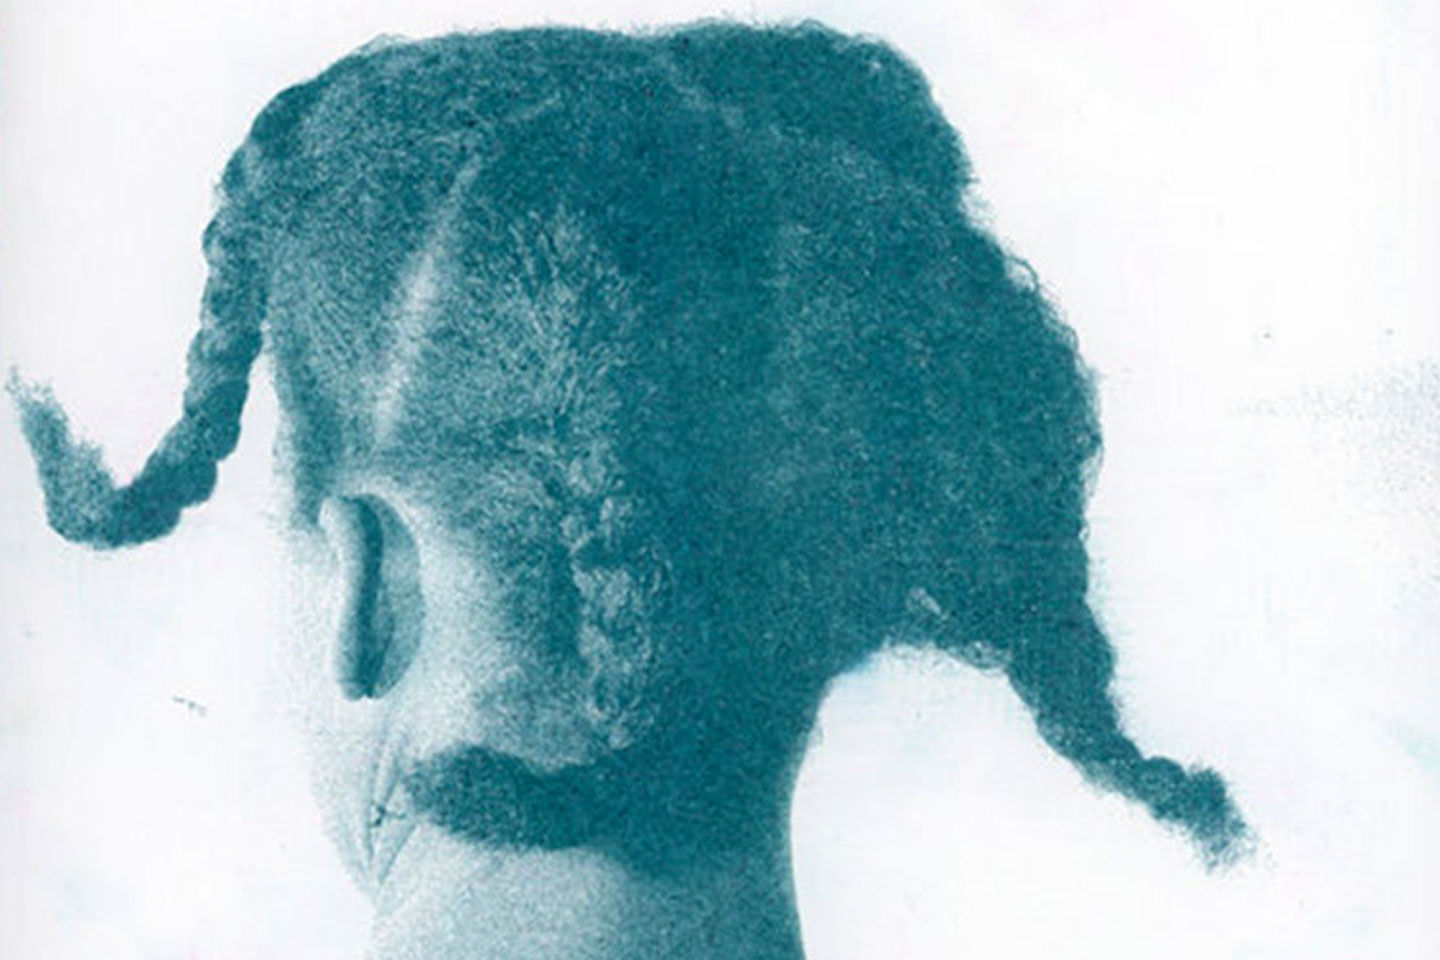 Photograph in a blue tone of the back of someone's head and braided hair